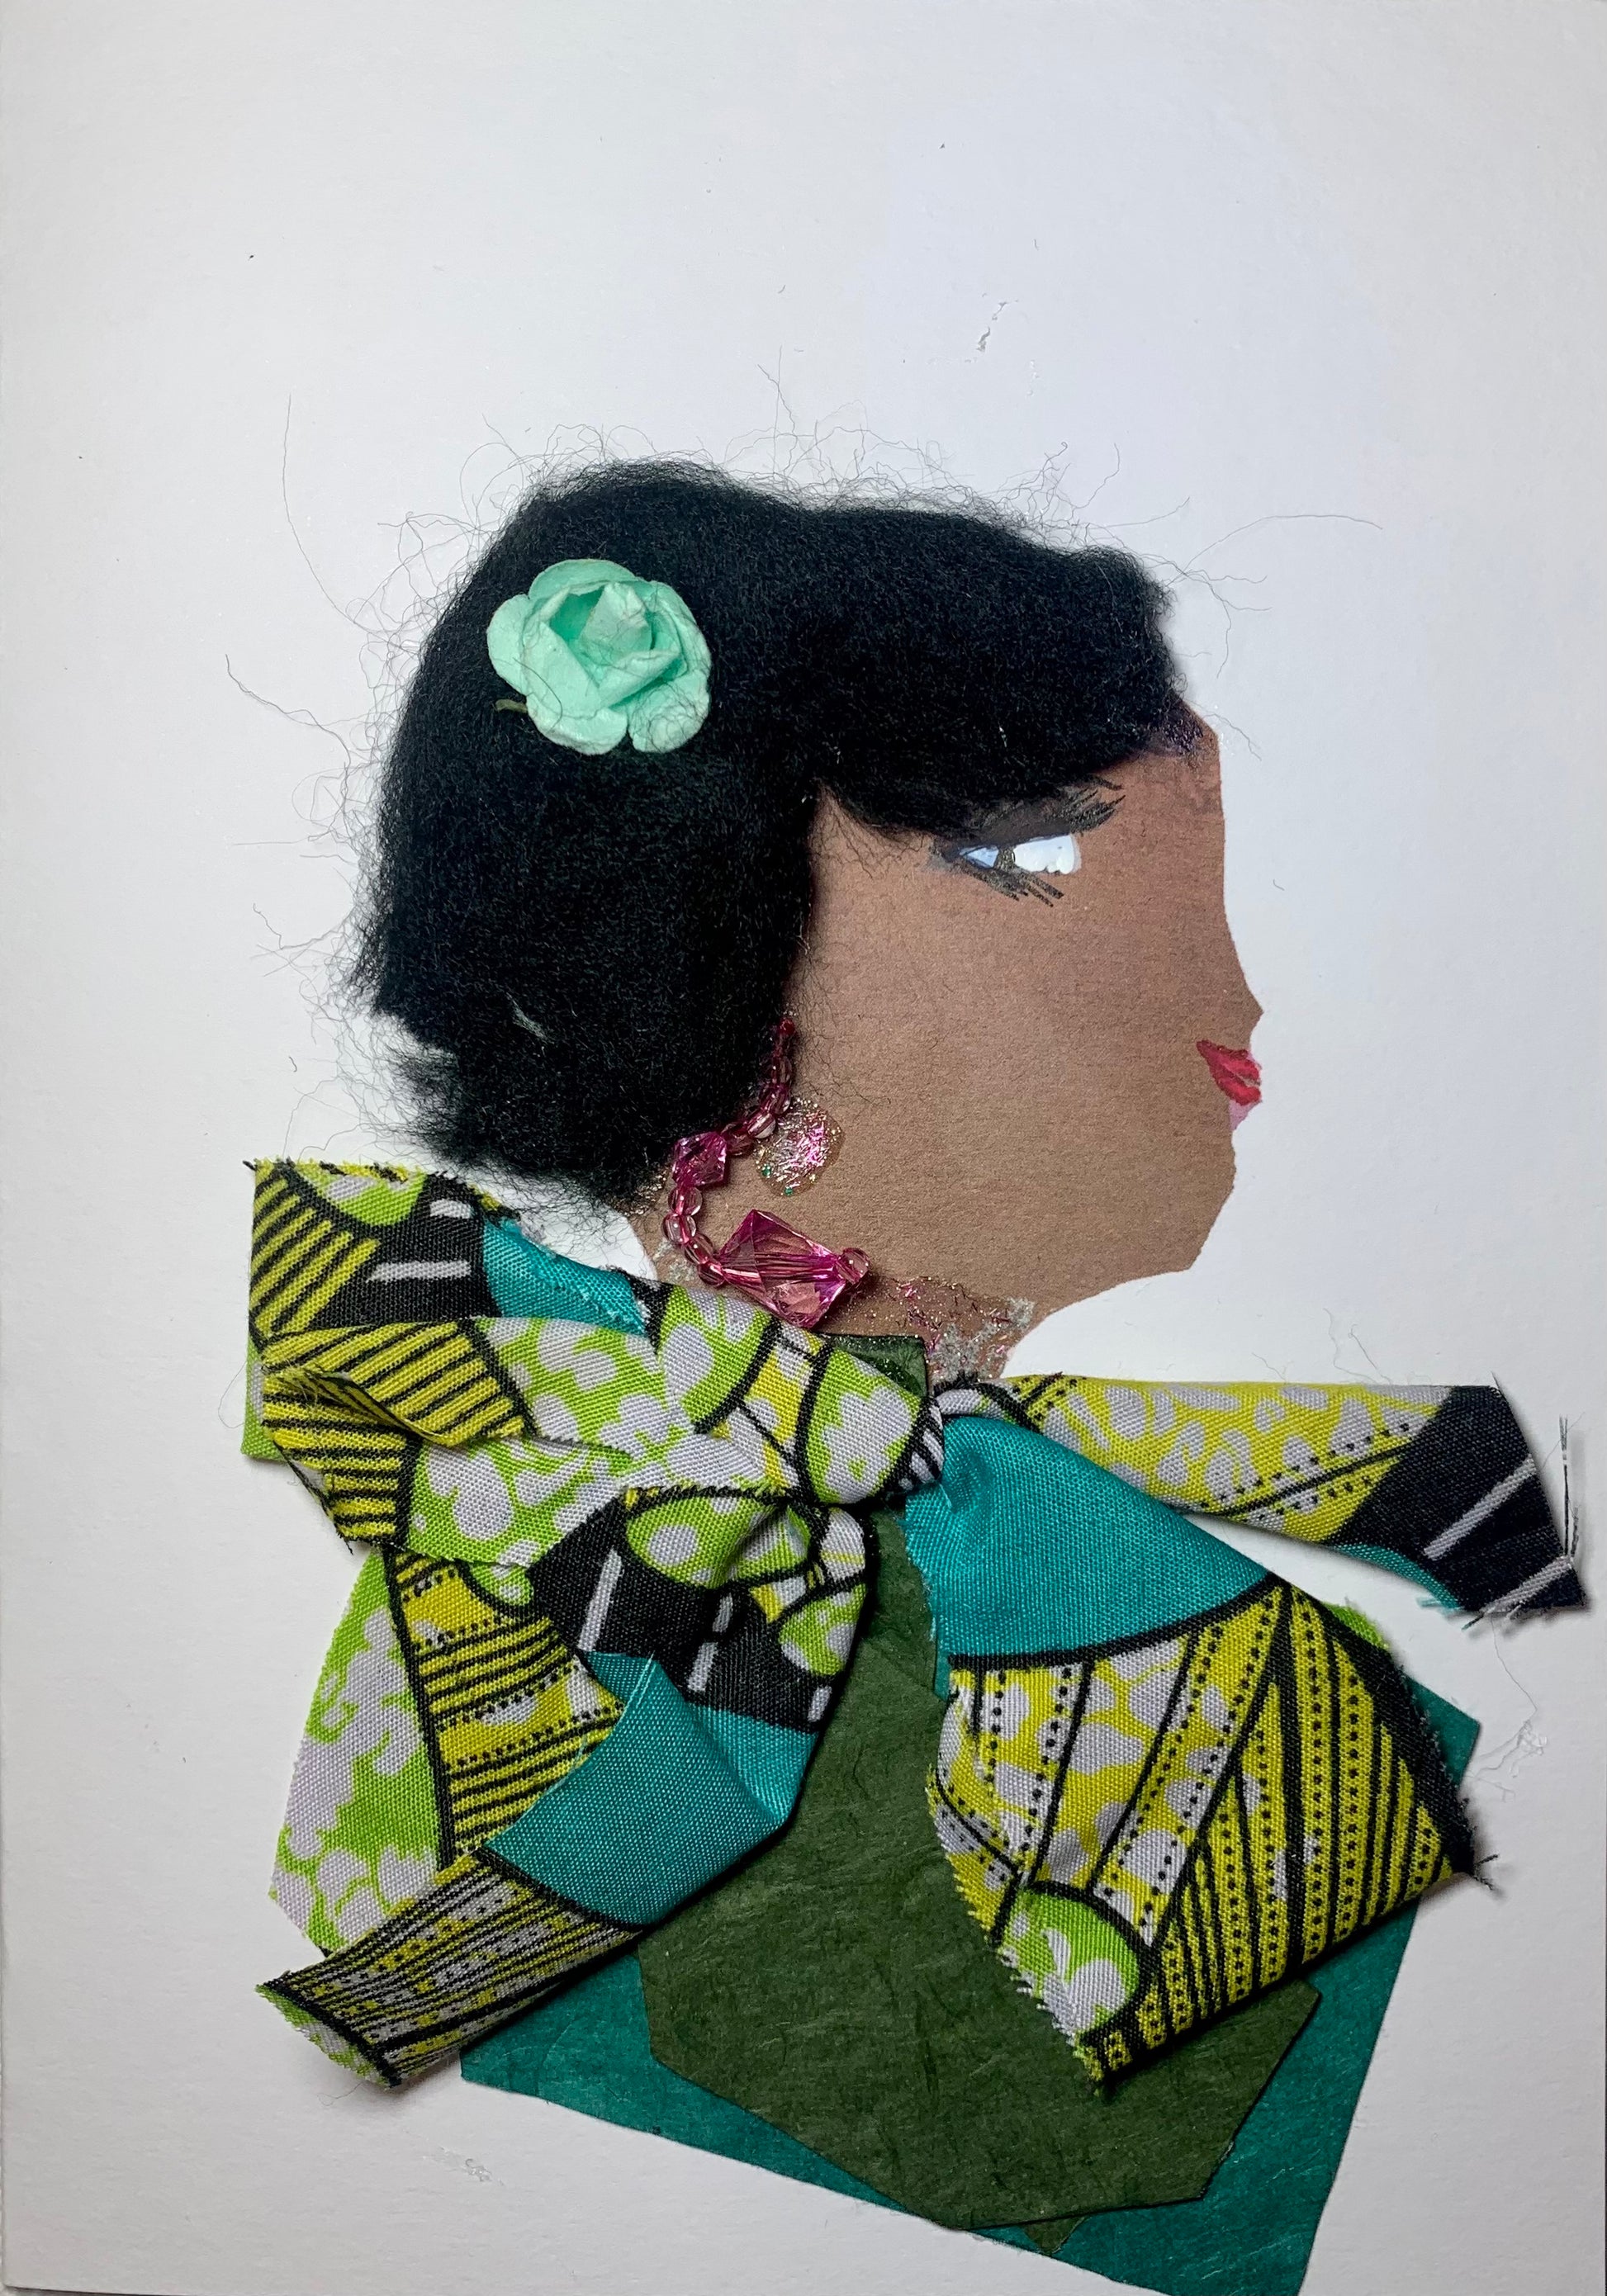 This card has been given the name Great Green. Great green wears a green, turquoise, and yellow printed blouse and has a light blue flower in her short black hair. Her earring is pink crystal and beaded. 